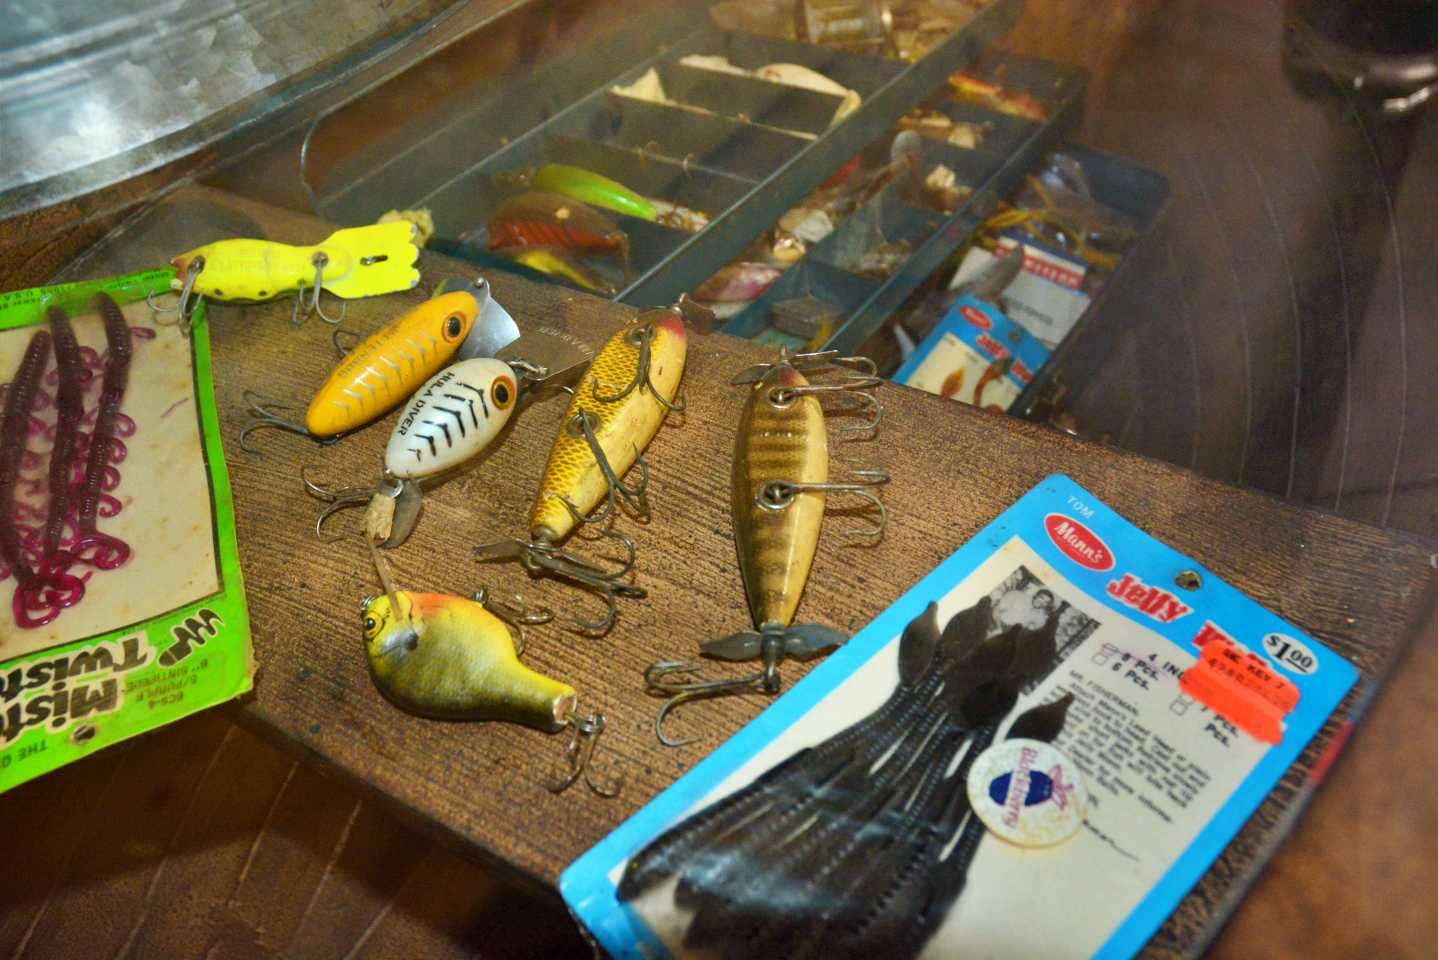 A package of Mannâs Jelly Worms, still in the package, with the photo of Tom Mann on the card. And another unopened package of Mister Twister Centipede Worms is nearby. Between them are vintage hard baits, including an Arbogast Hula Diver.